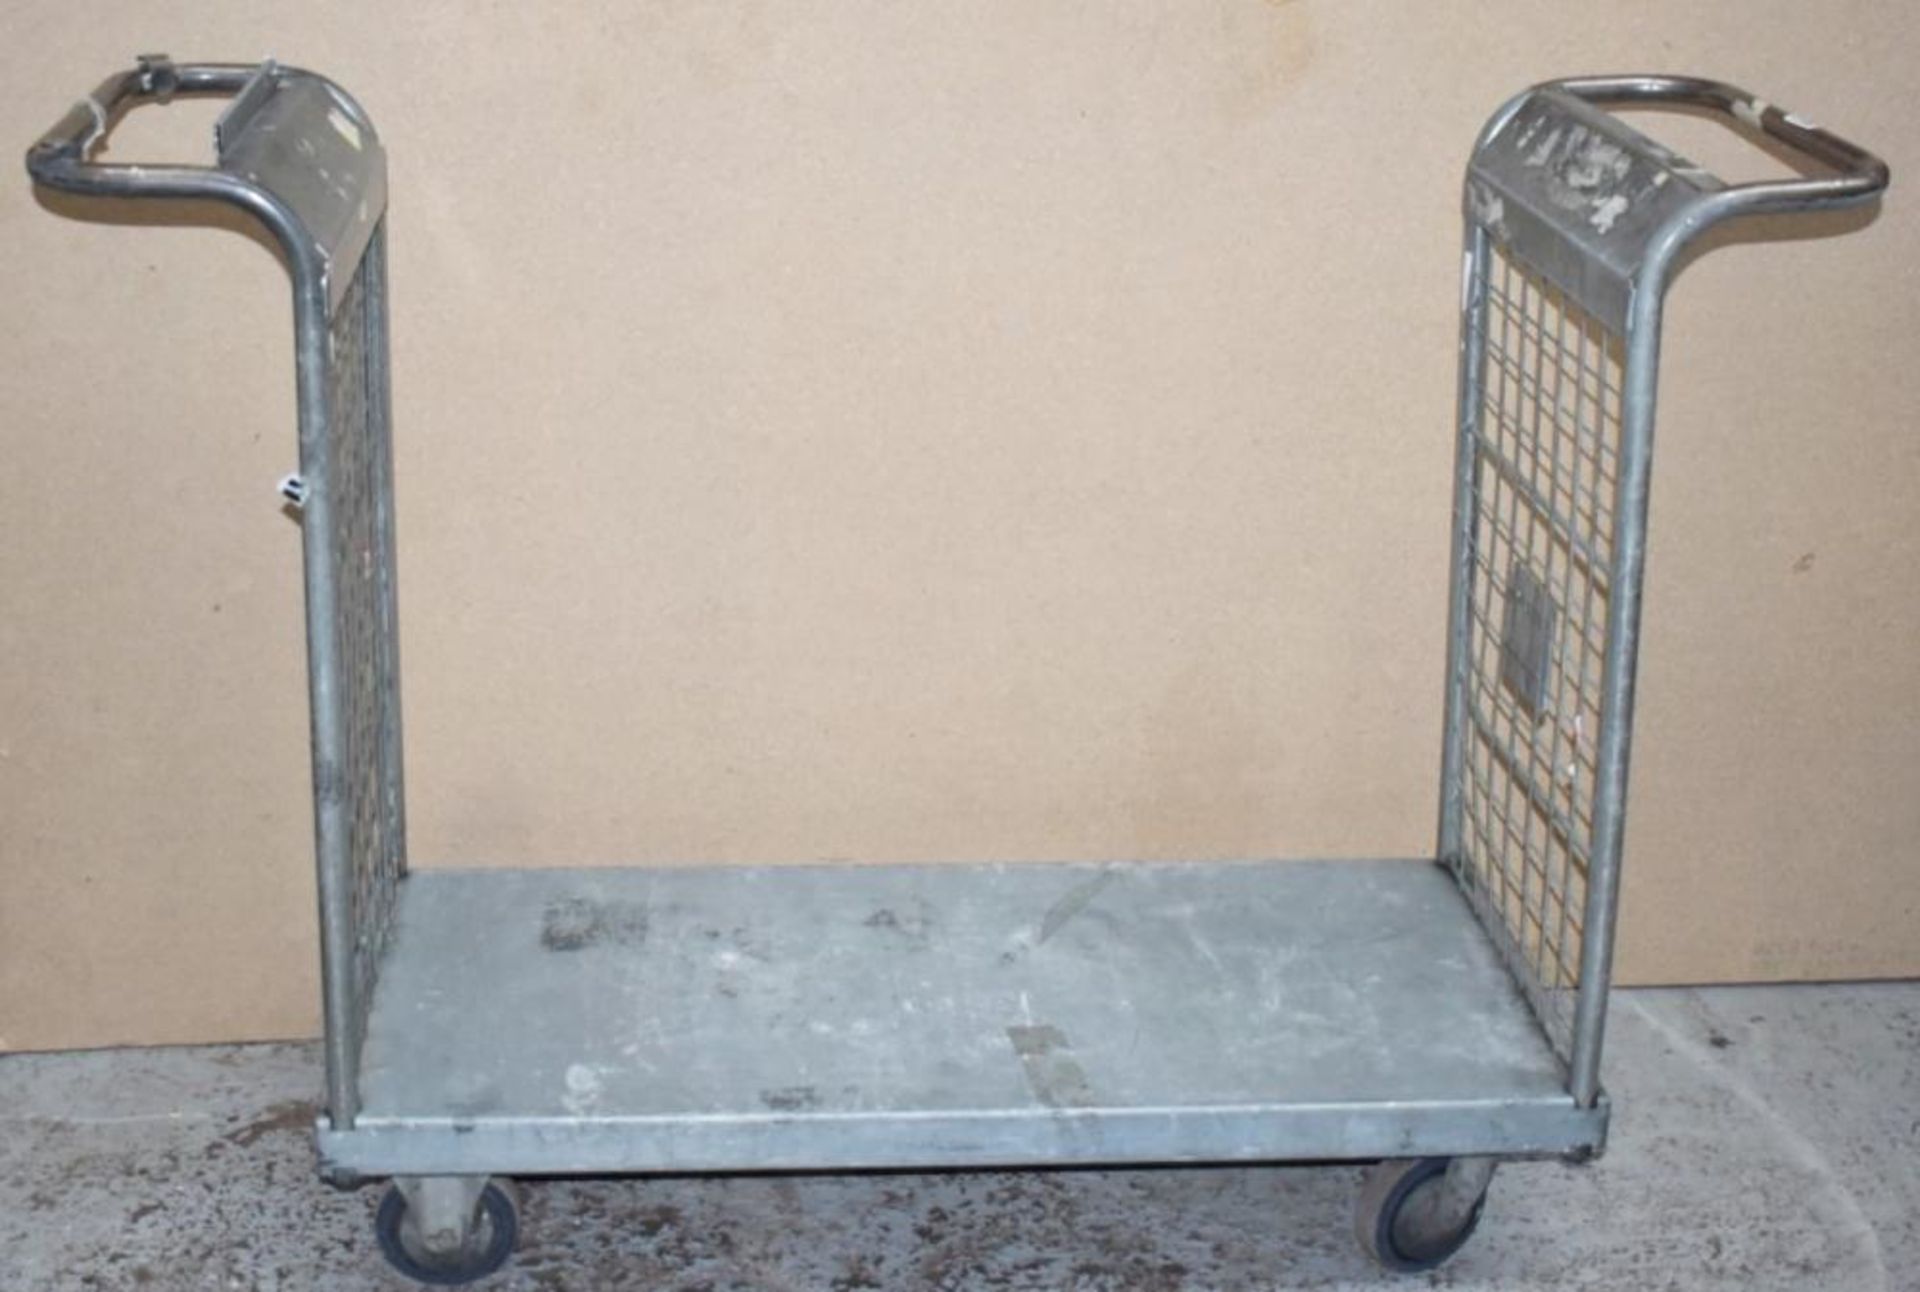 1 x Platform Trolley With Heavy Duty Wheels, Two Handles and Waste Bag Holder - Features a 100 x 46 - Image 3 of 6